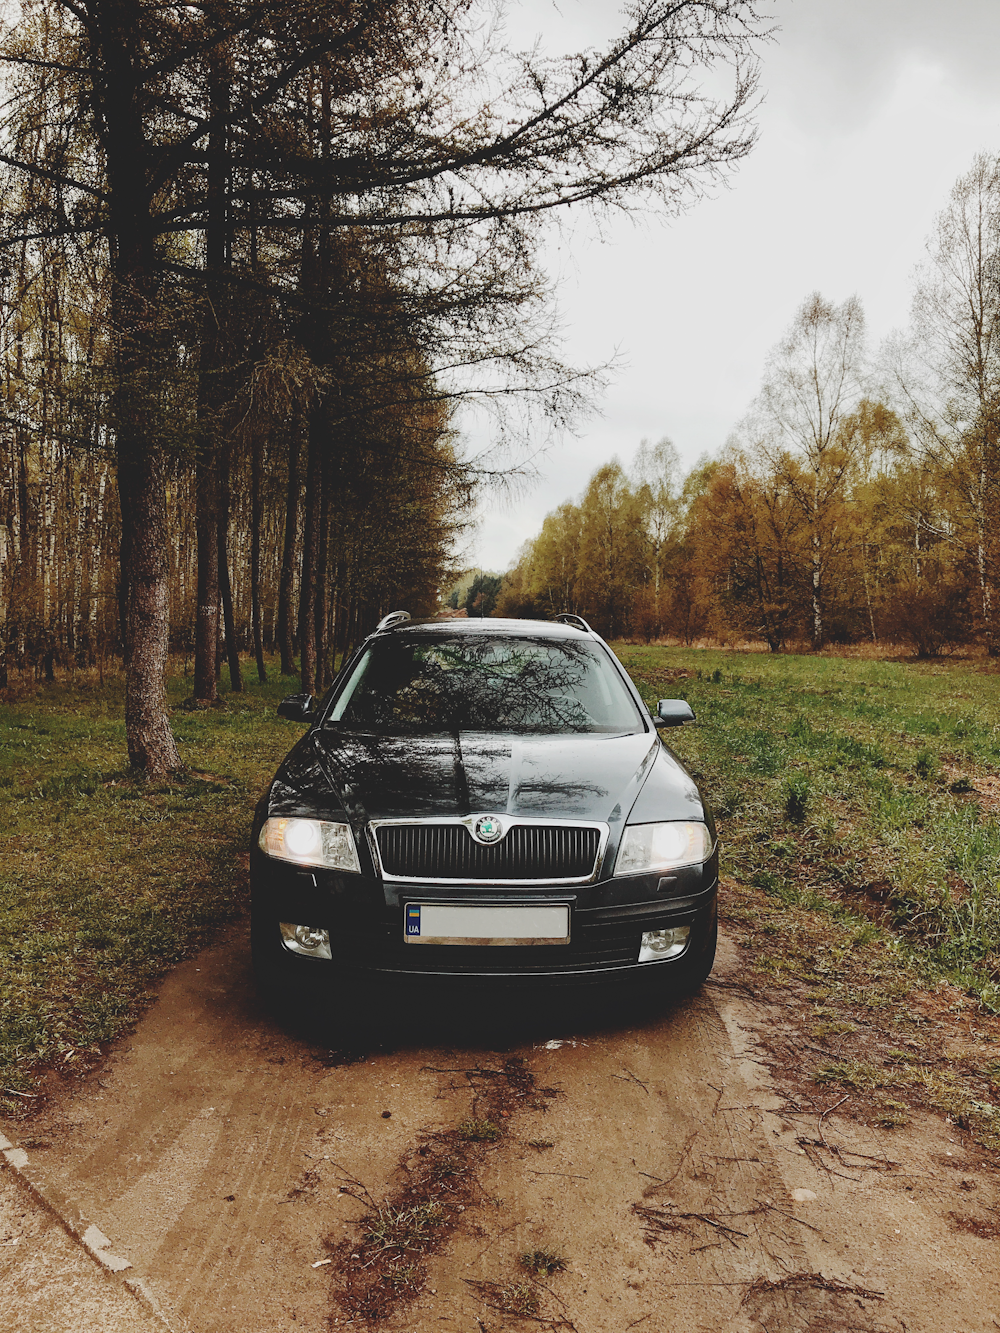 black car parked on brown dirt road near trees during daytime